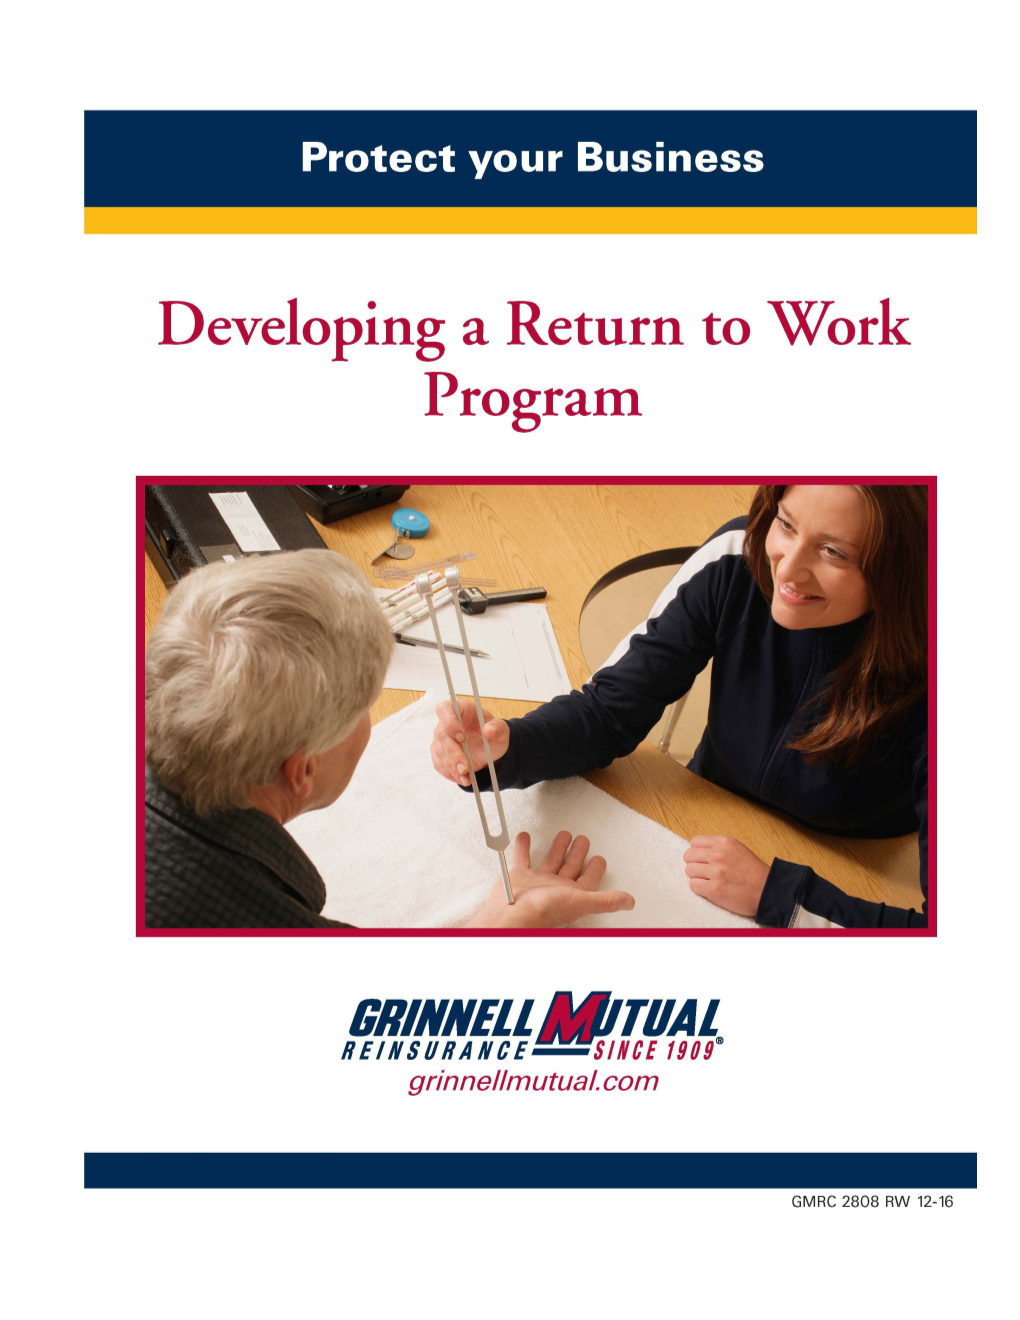 Section I How to Develop a Return to Work Program